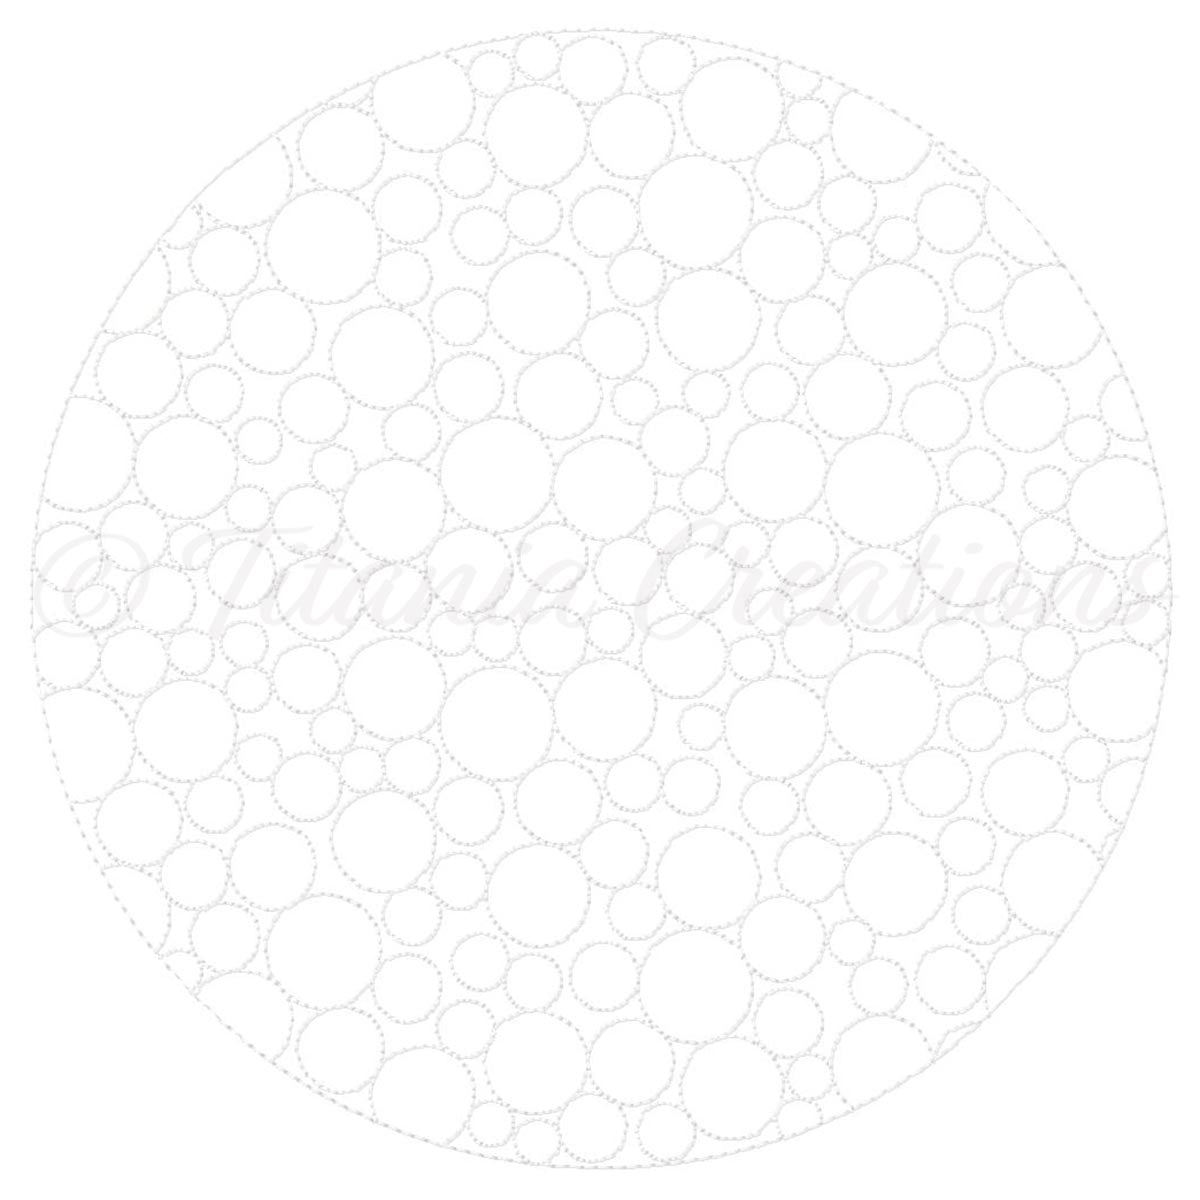 Bubble Round Quilt Blocks 5 Sizes Included